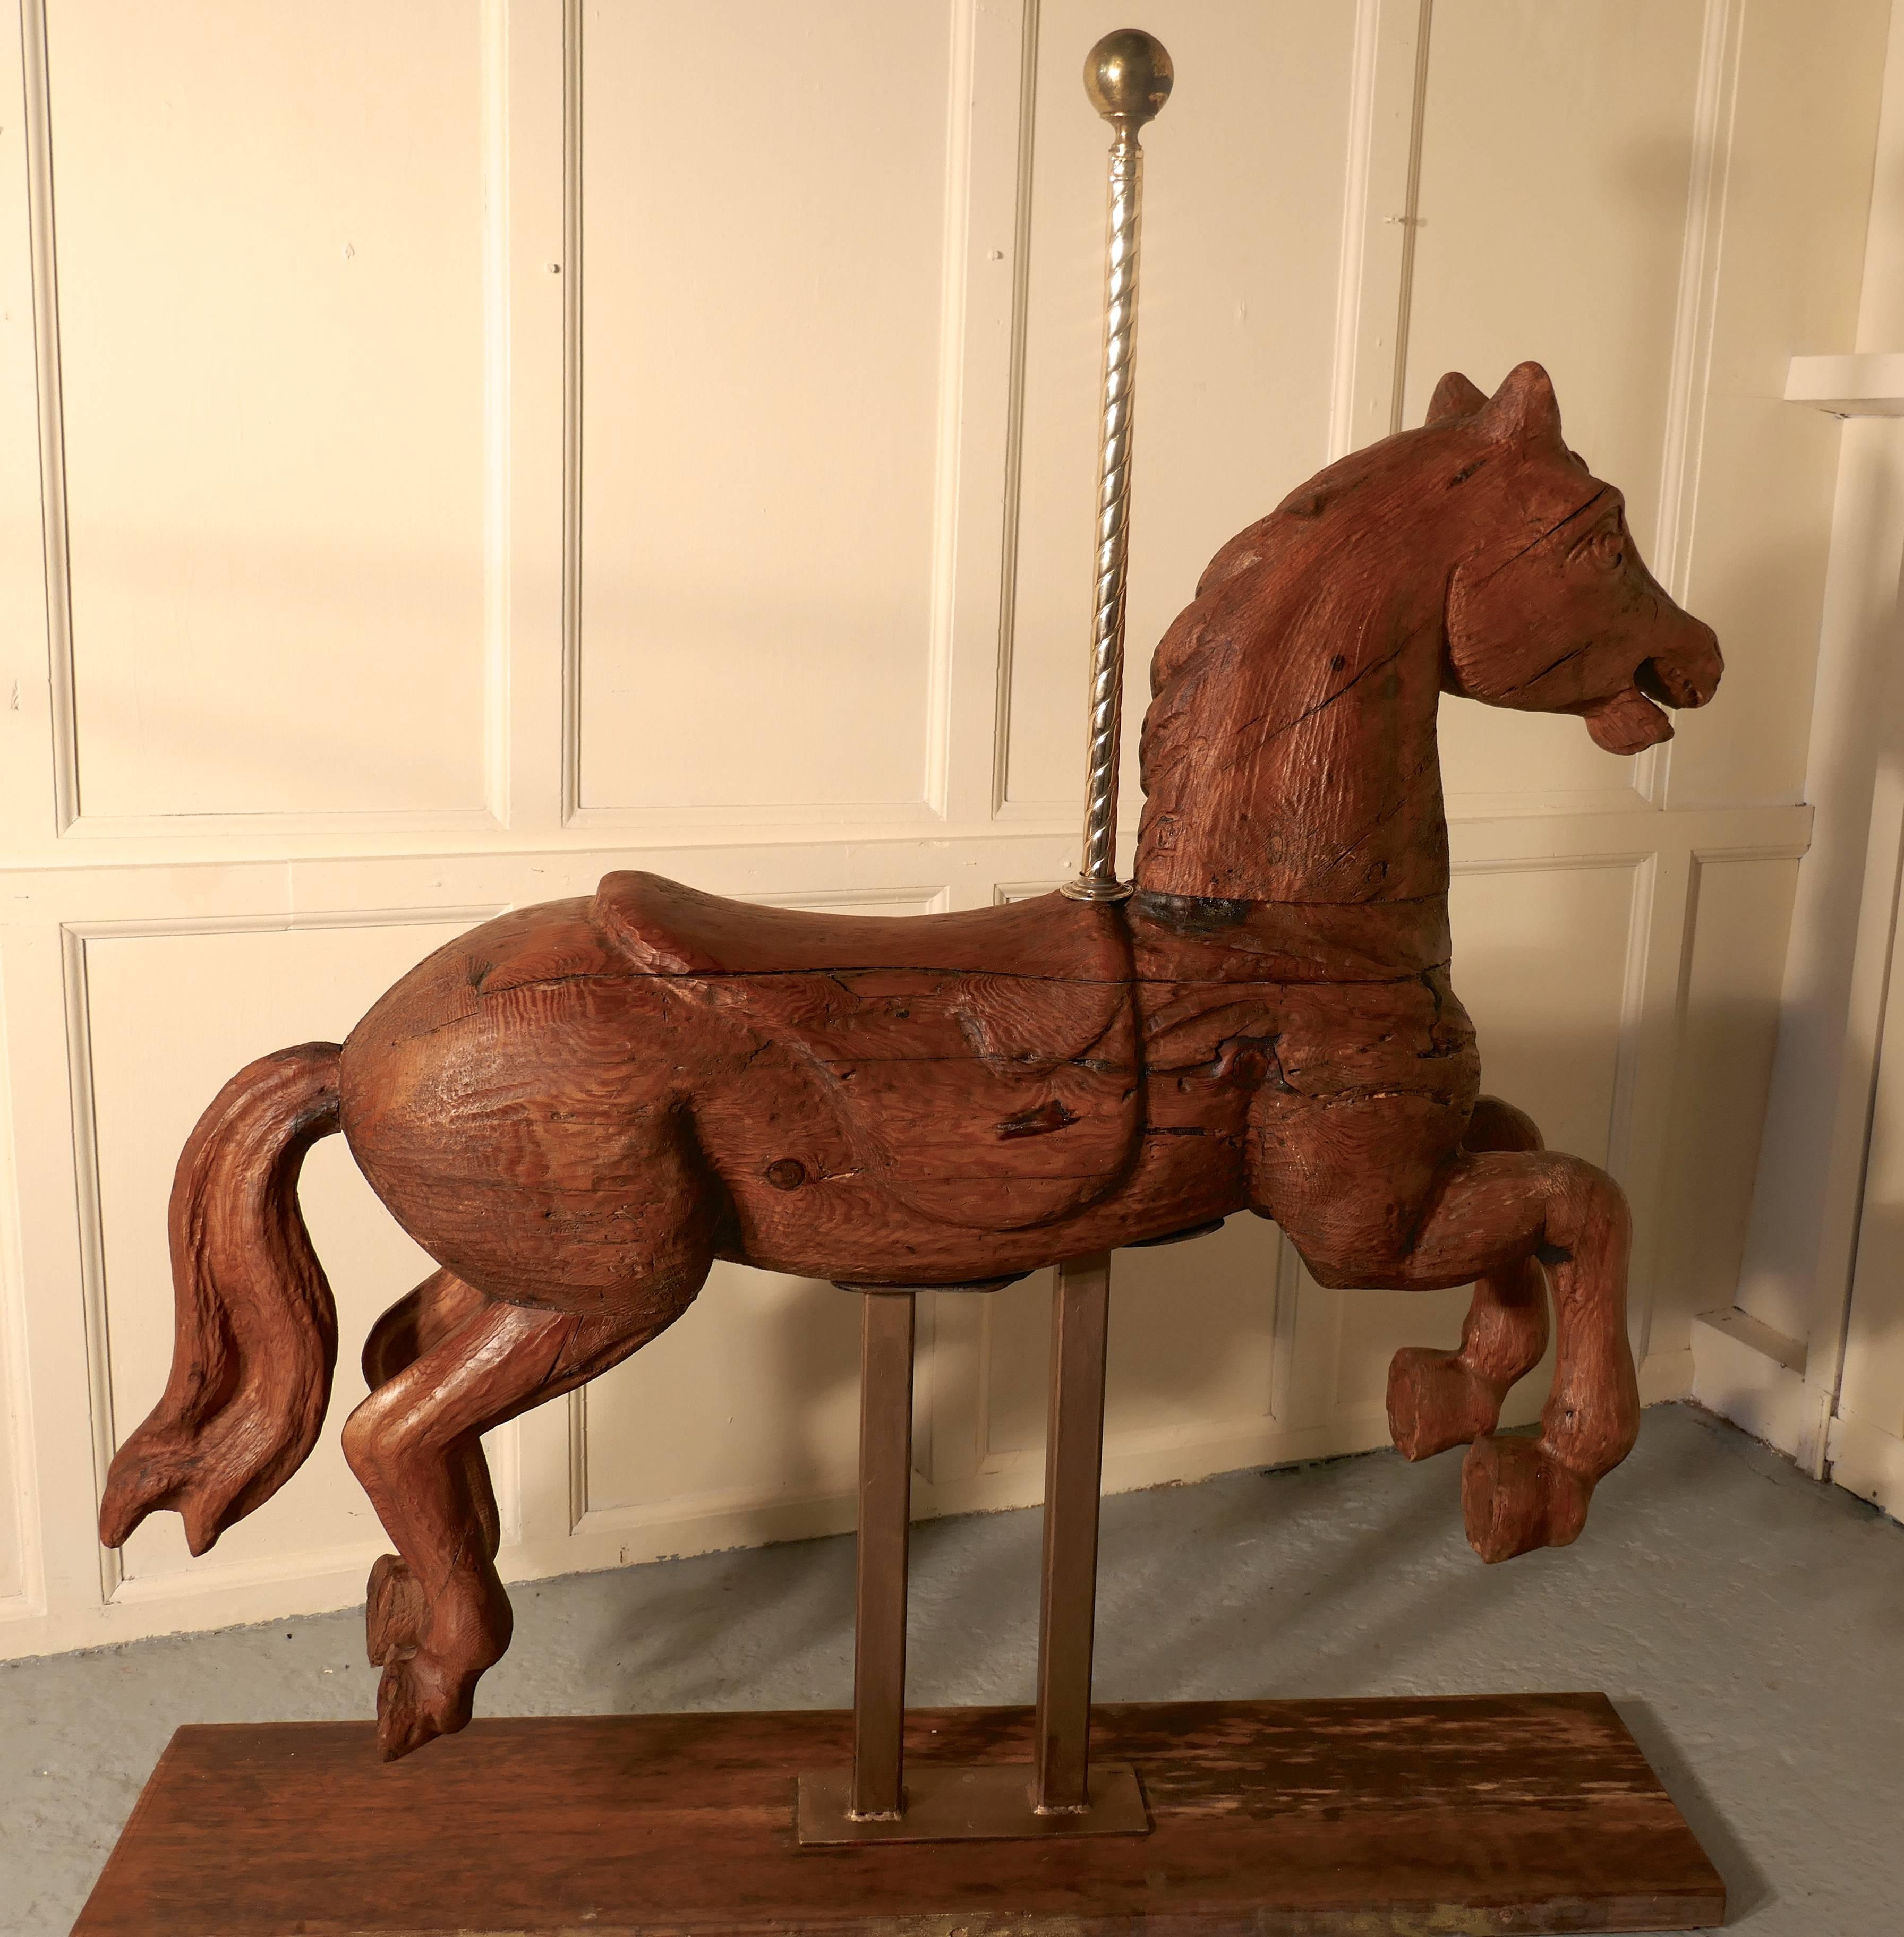 19th century Spanish wooden carousel galloper or fair ground horse

An original the 19th century fair ground galloper, made in solid wood, the paint has all been worn away leaving a wonderful weather-beaten aged finish.
The horse is posed in full